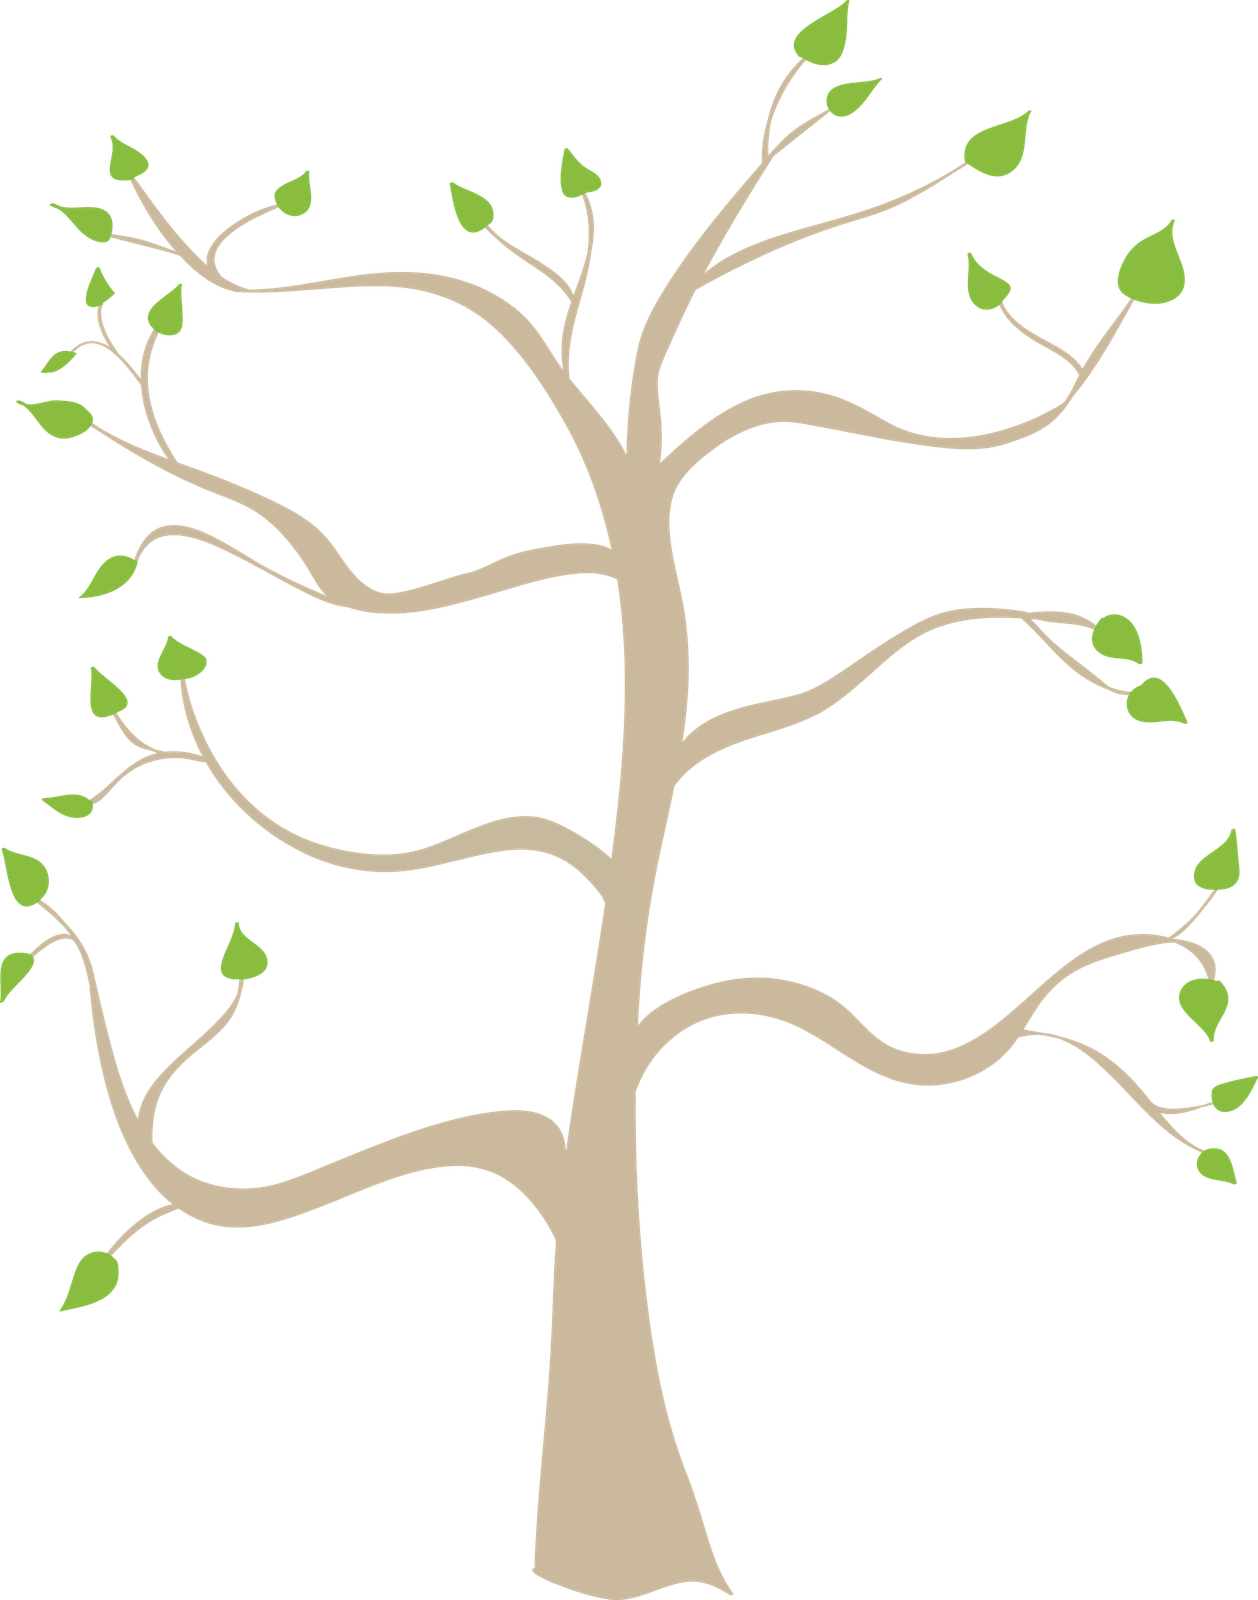 Free Family Tree Clipart Image - Family Tree 8 Branches (1258x1600)